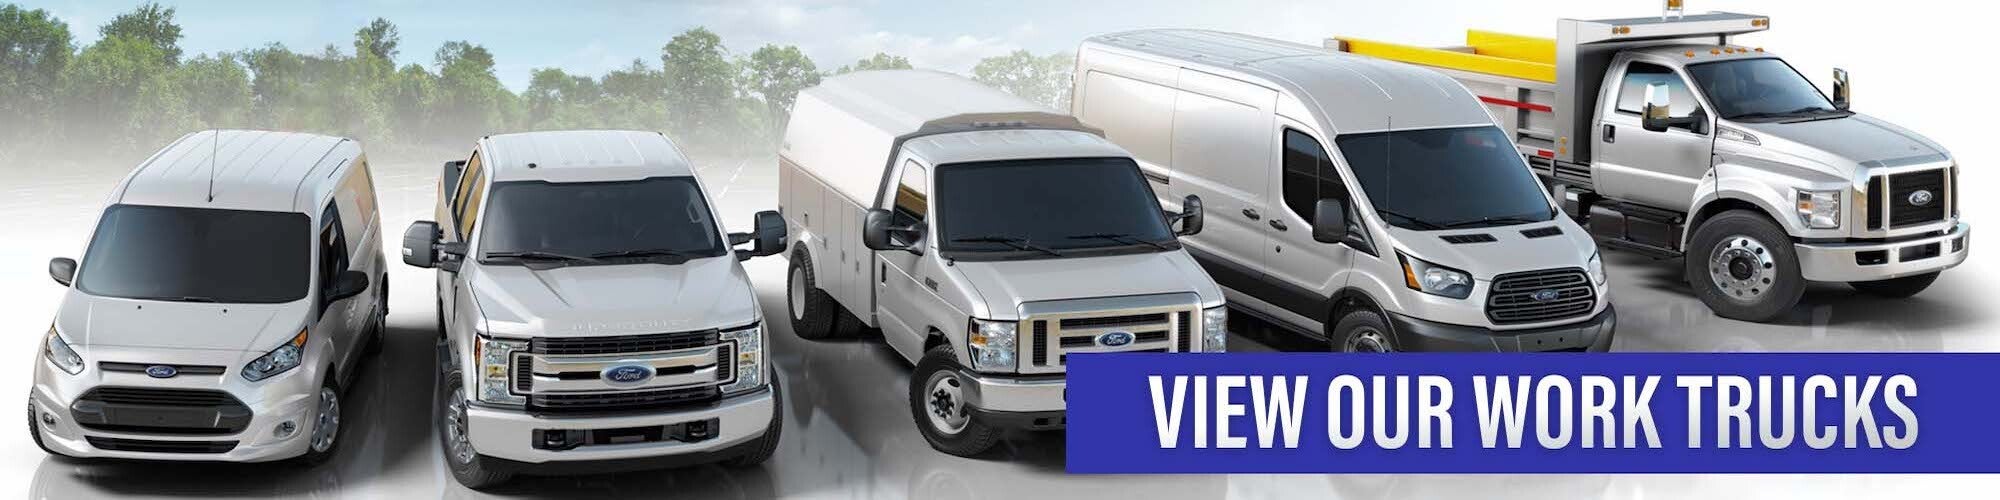 VIEW OUR WORK TRUCKS